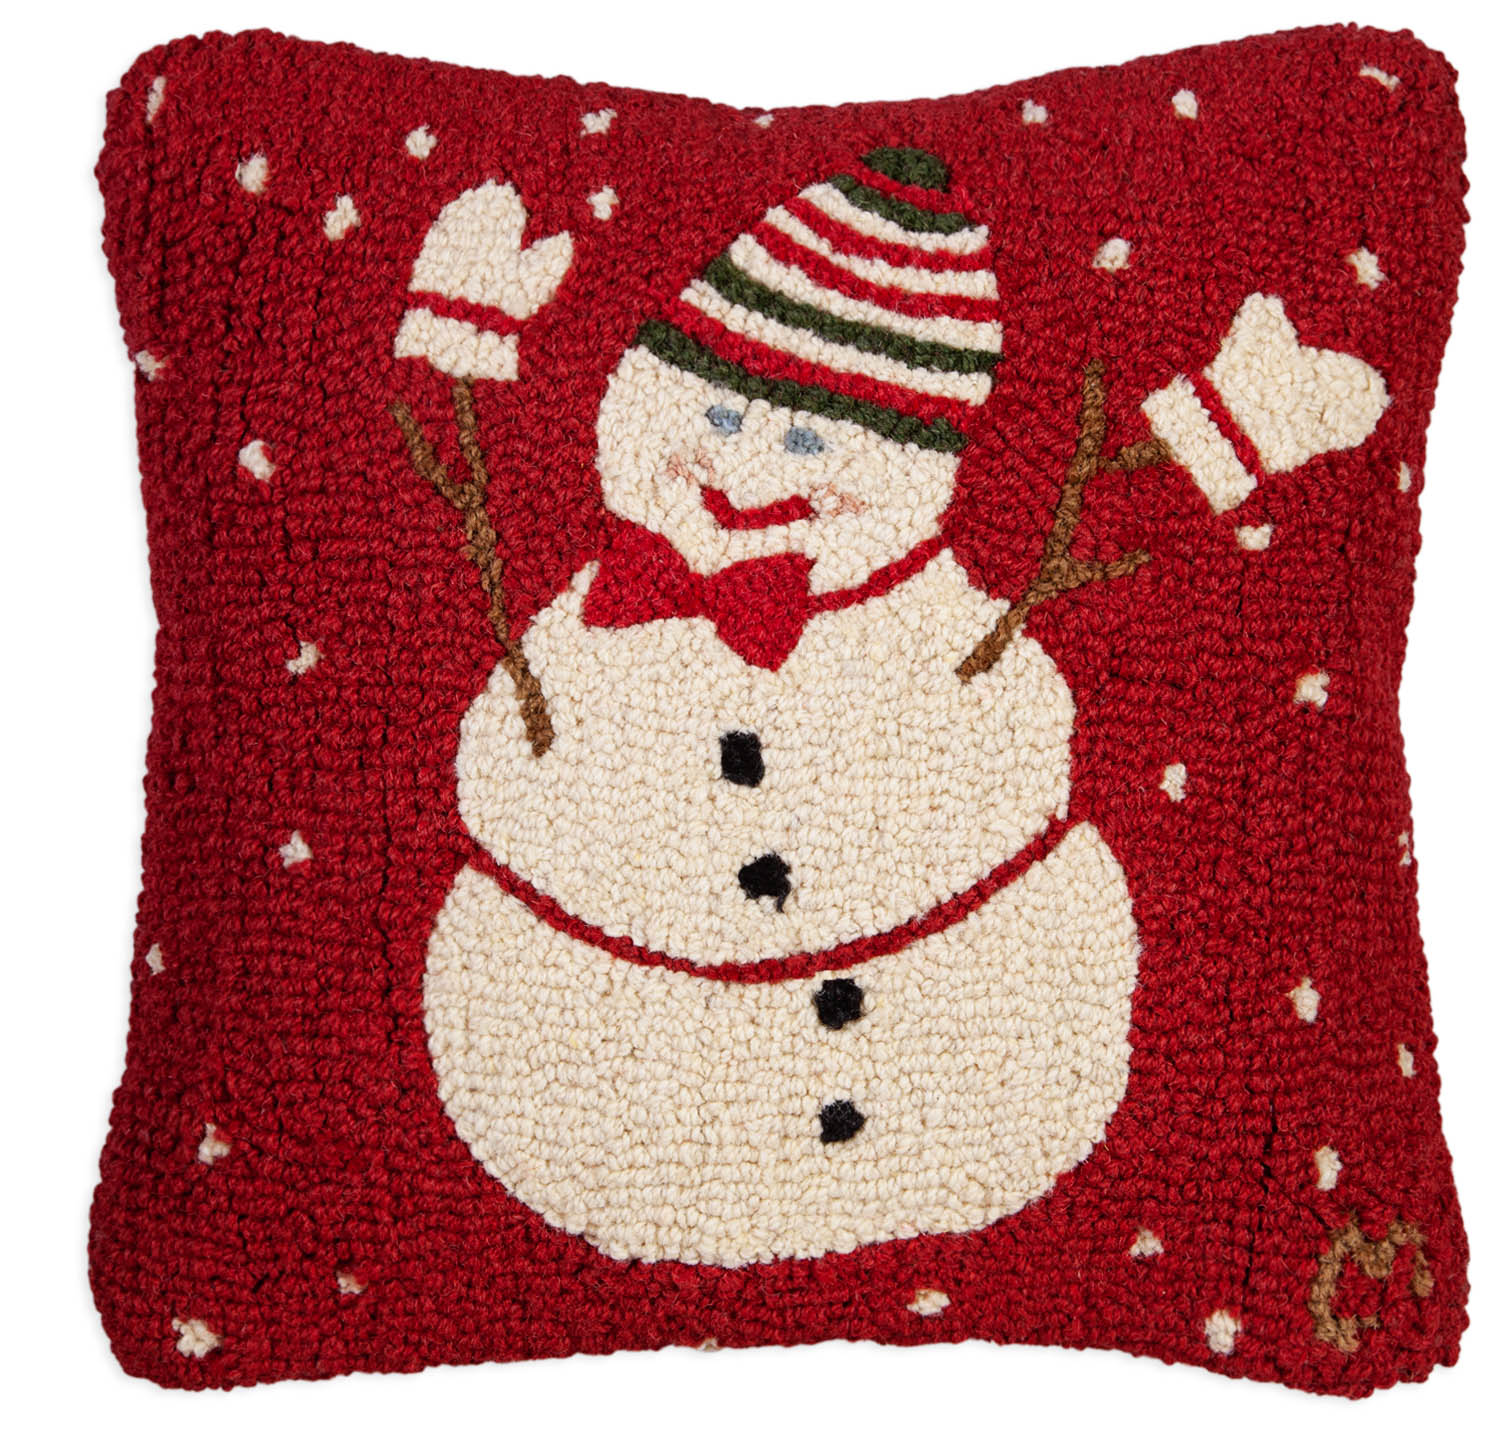 snowman-with-bow-tie-hooked-wool-pillow